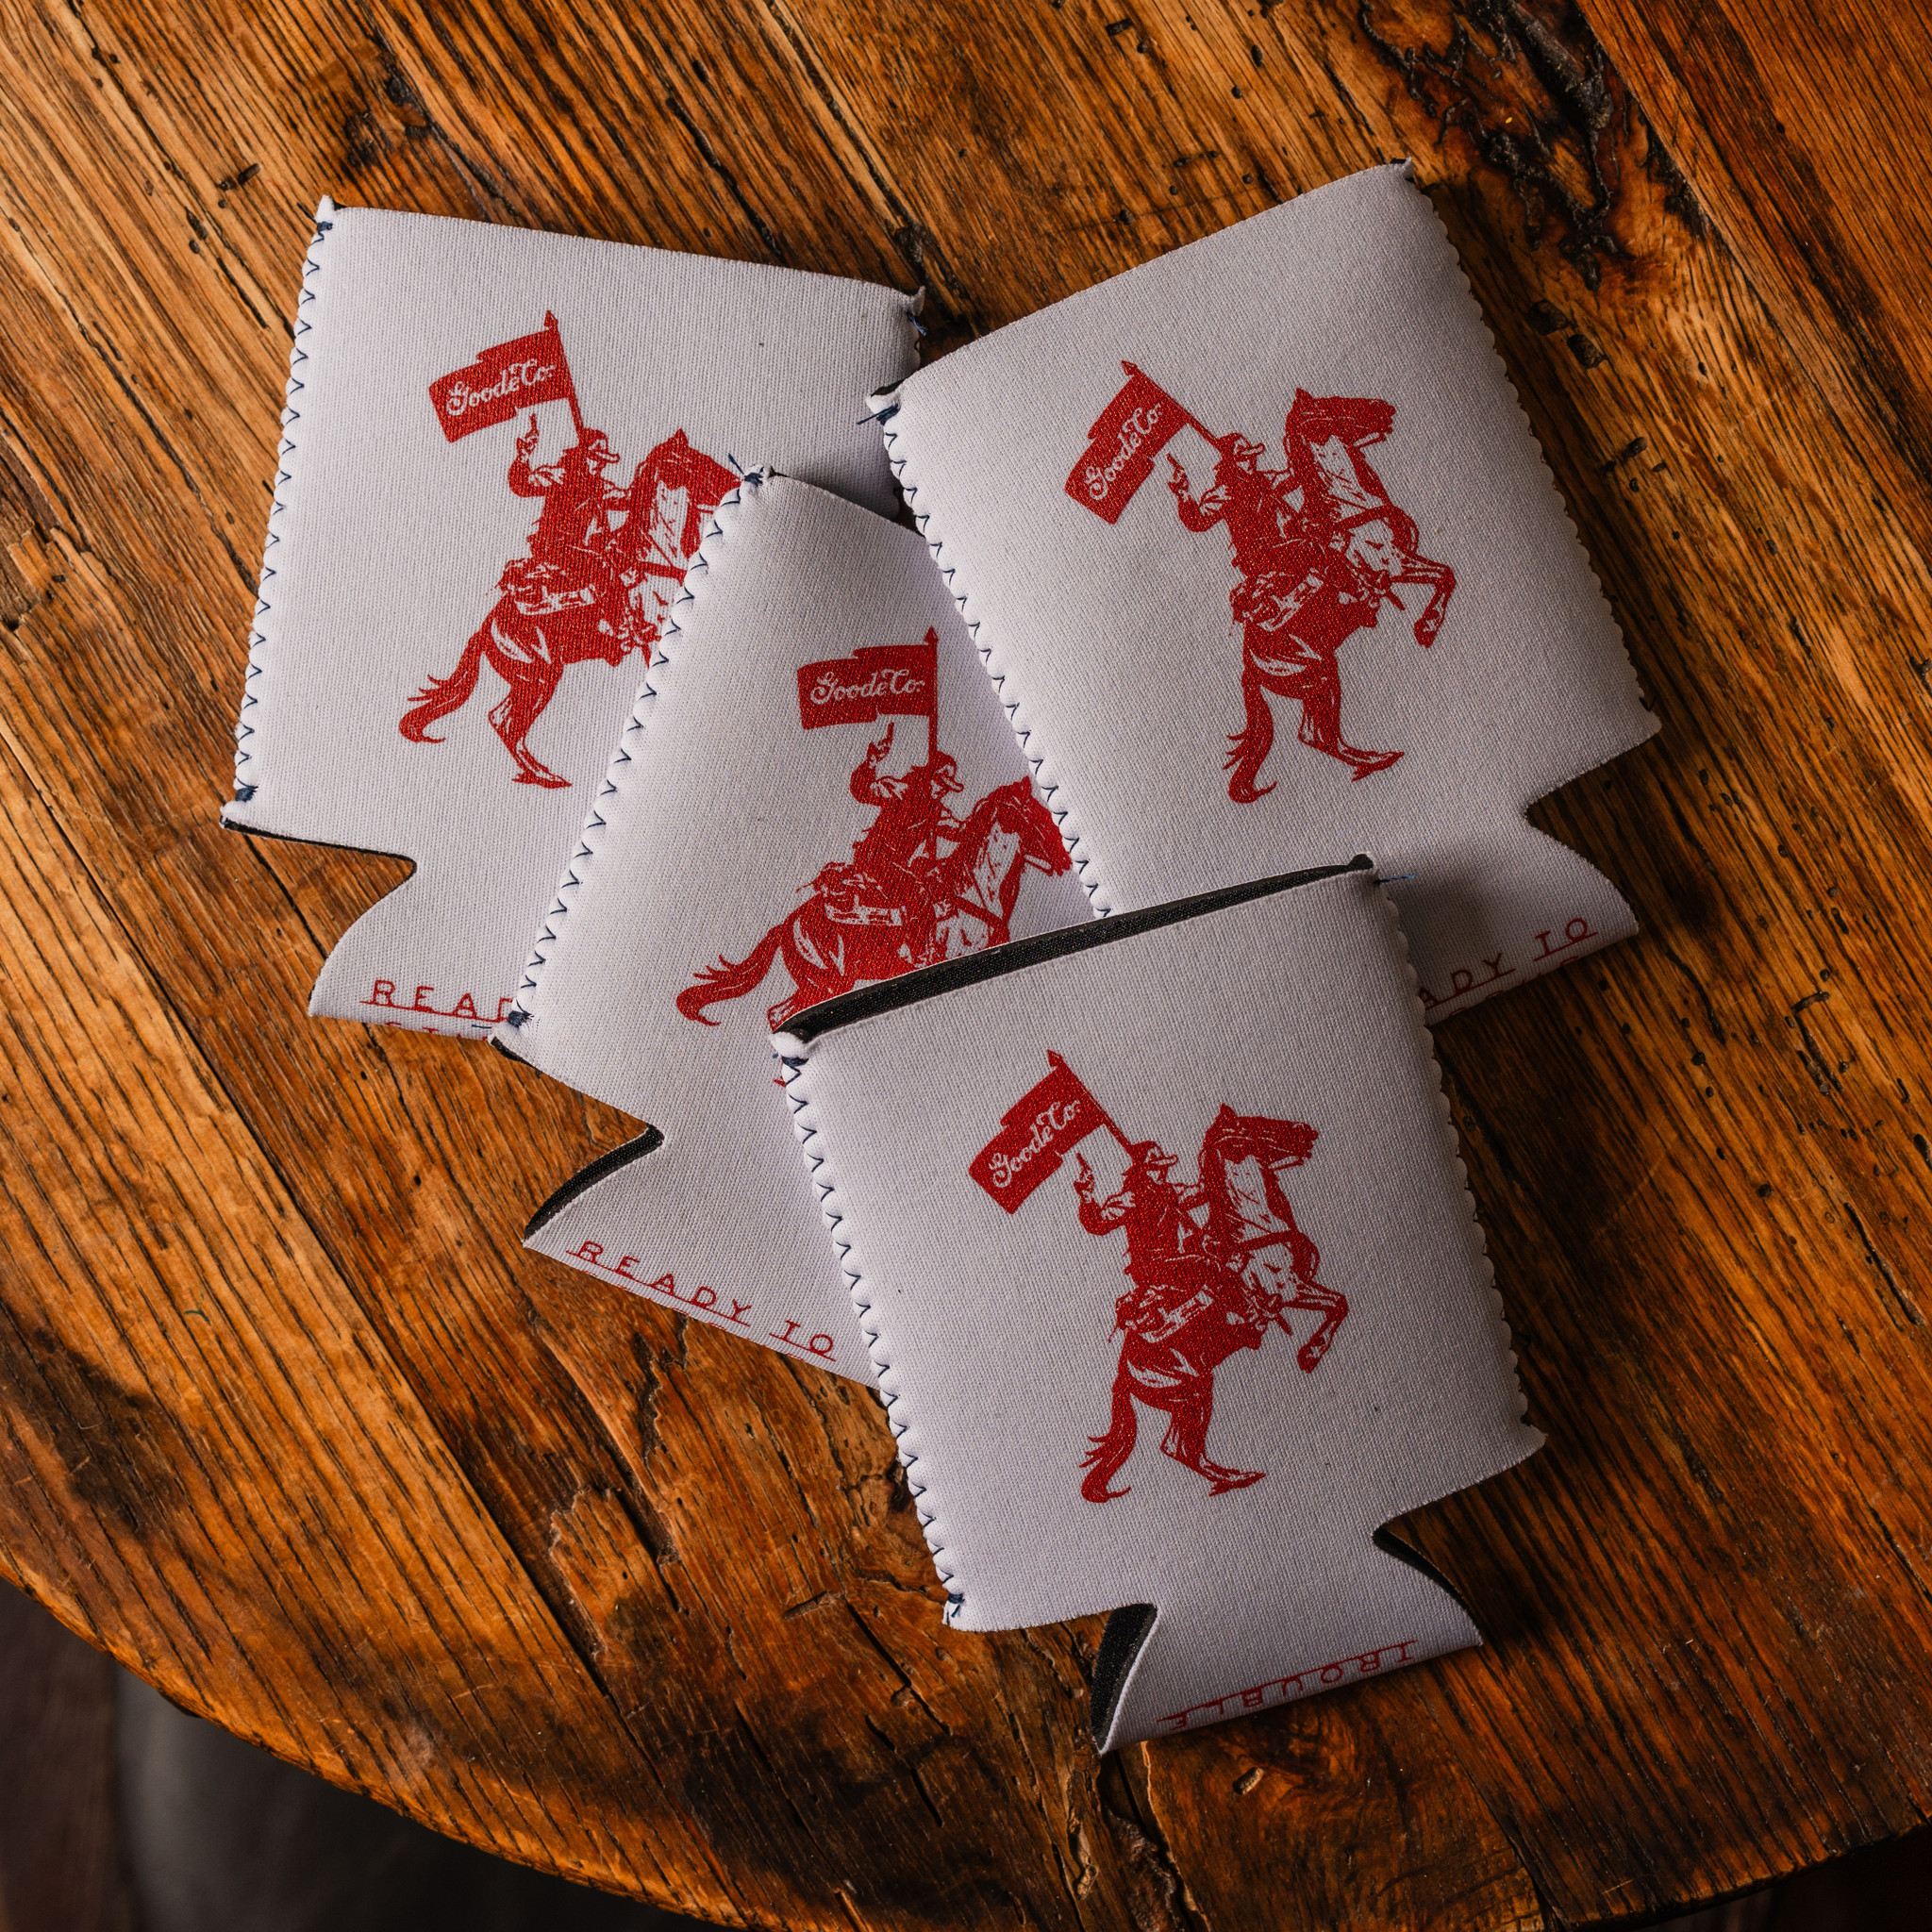 Koozies that are sure to stirrup trouble